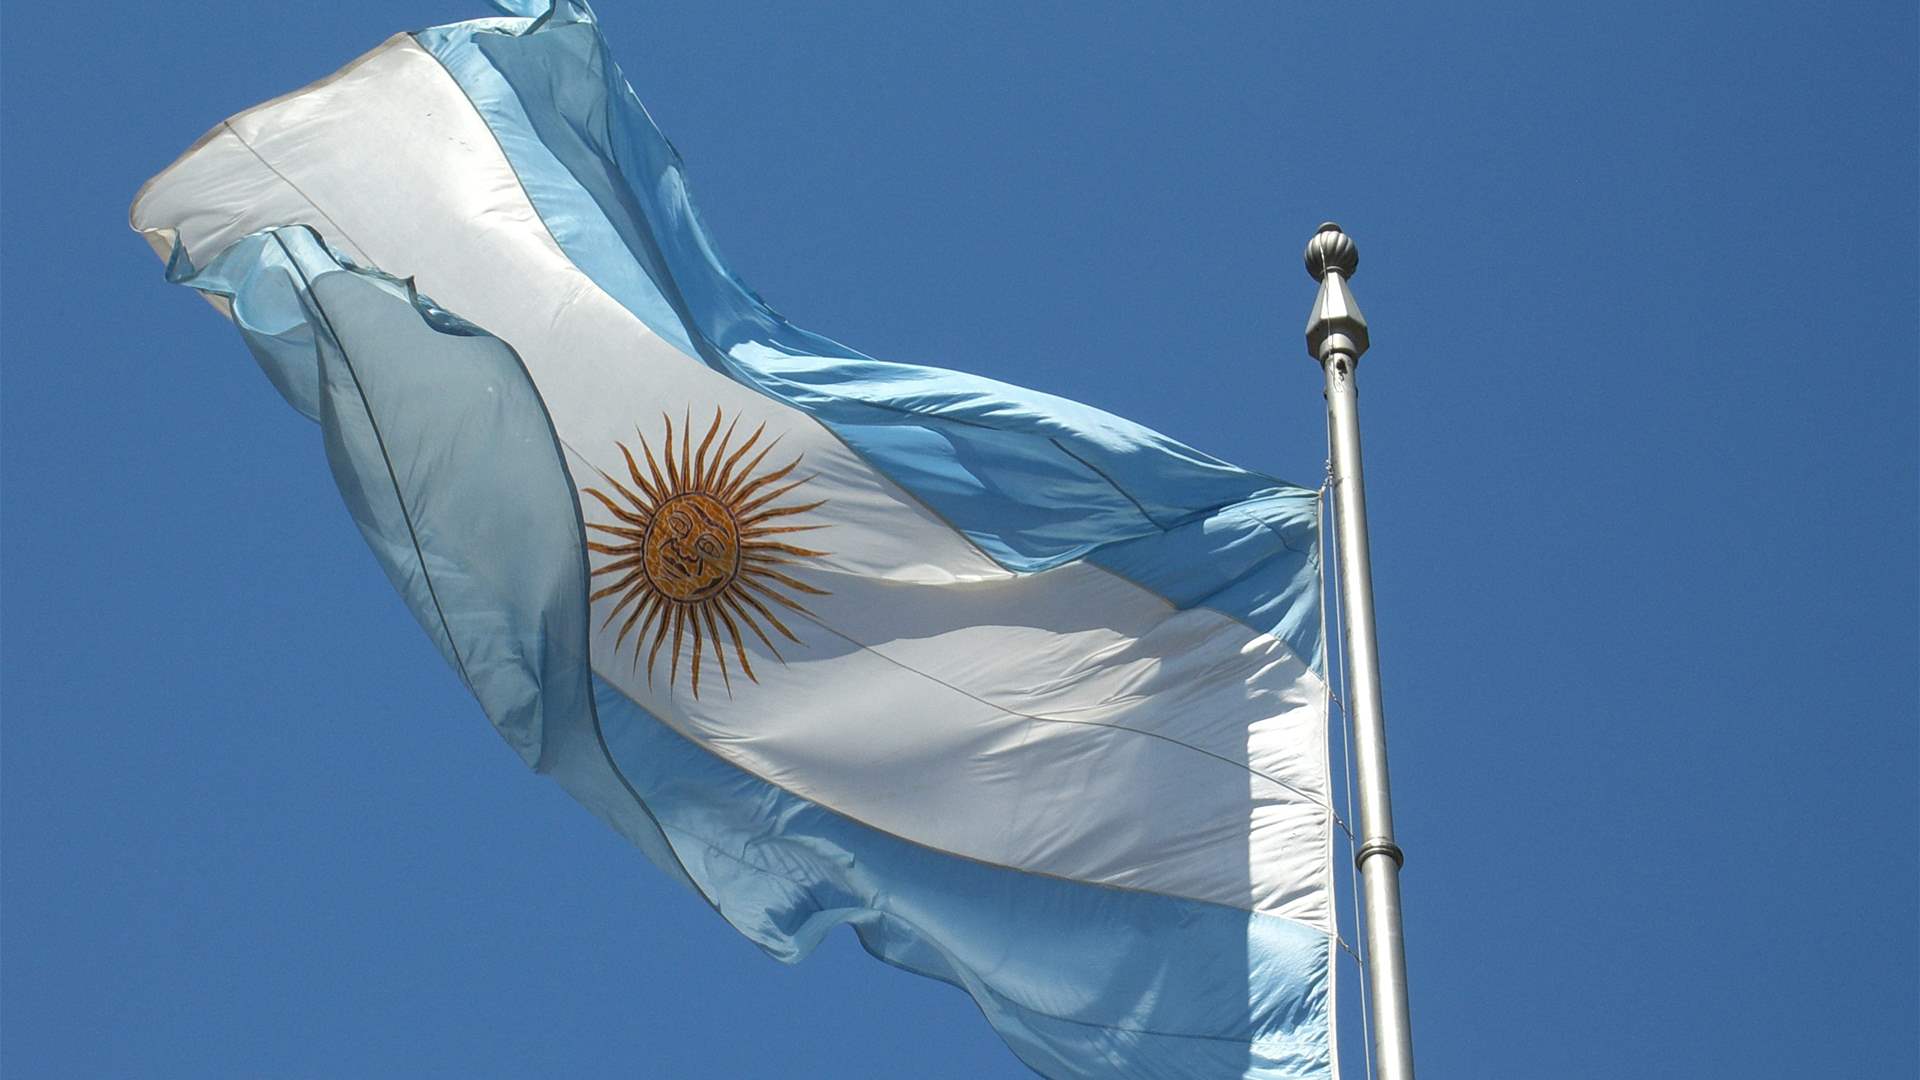 Primary elections in Argentina to select presidential candidates